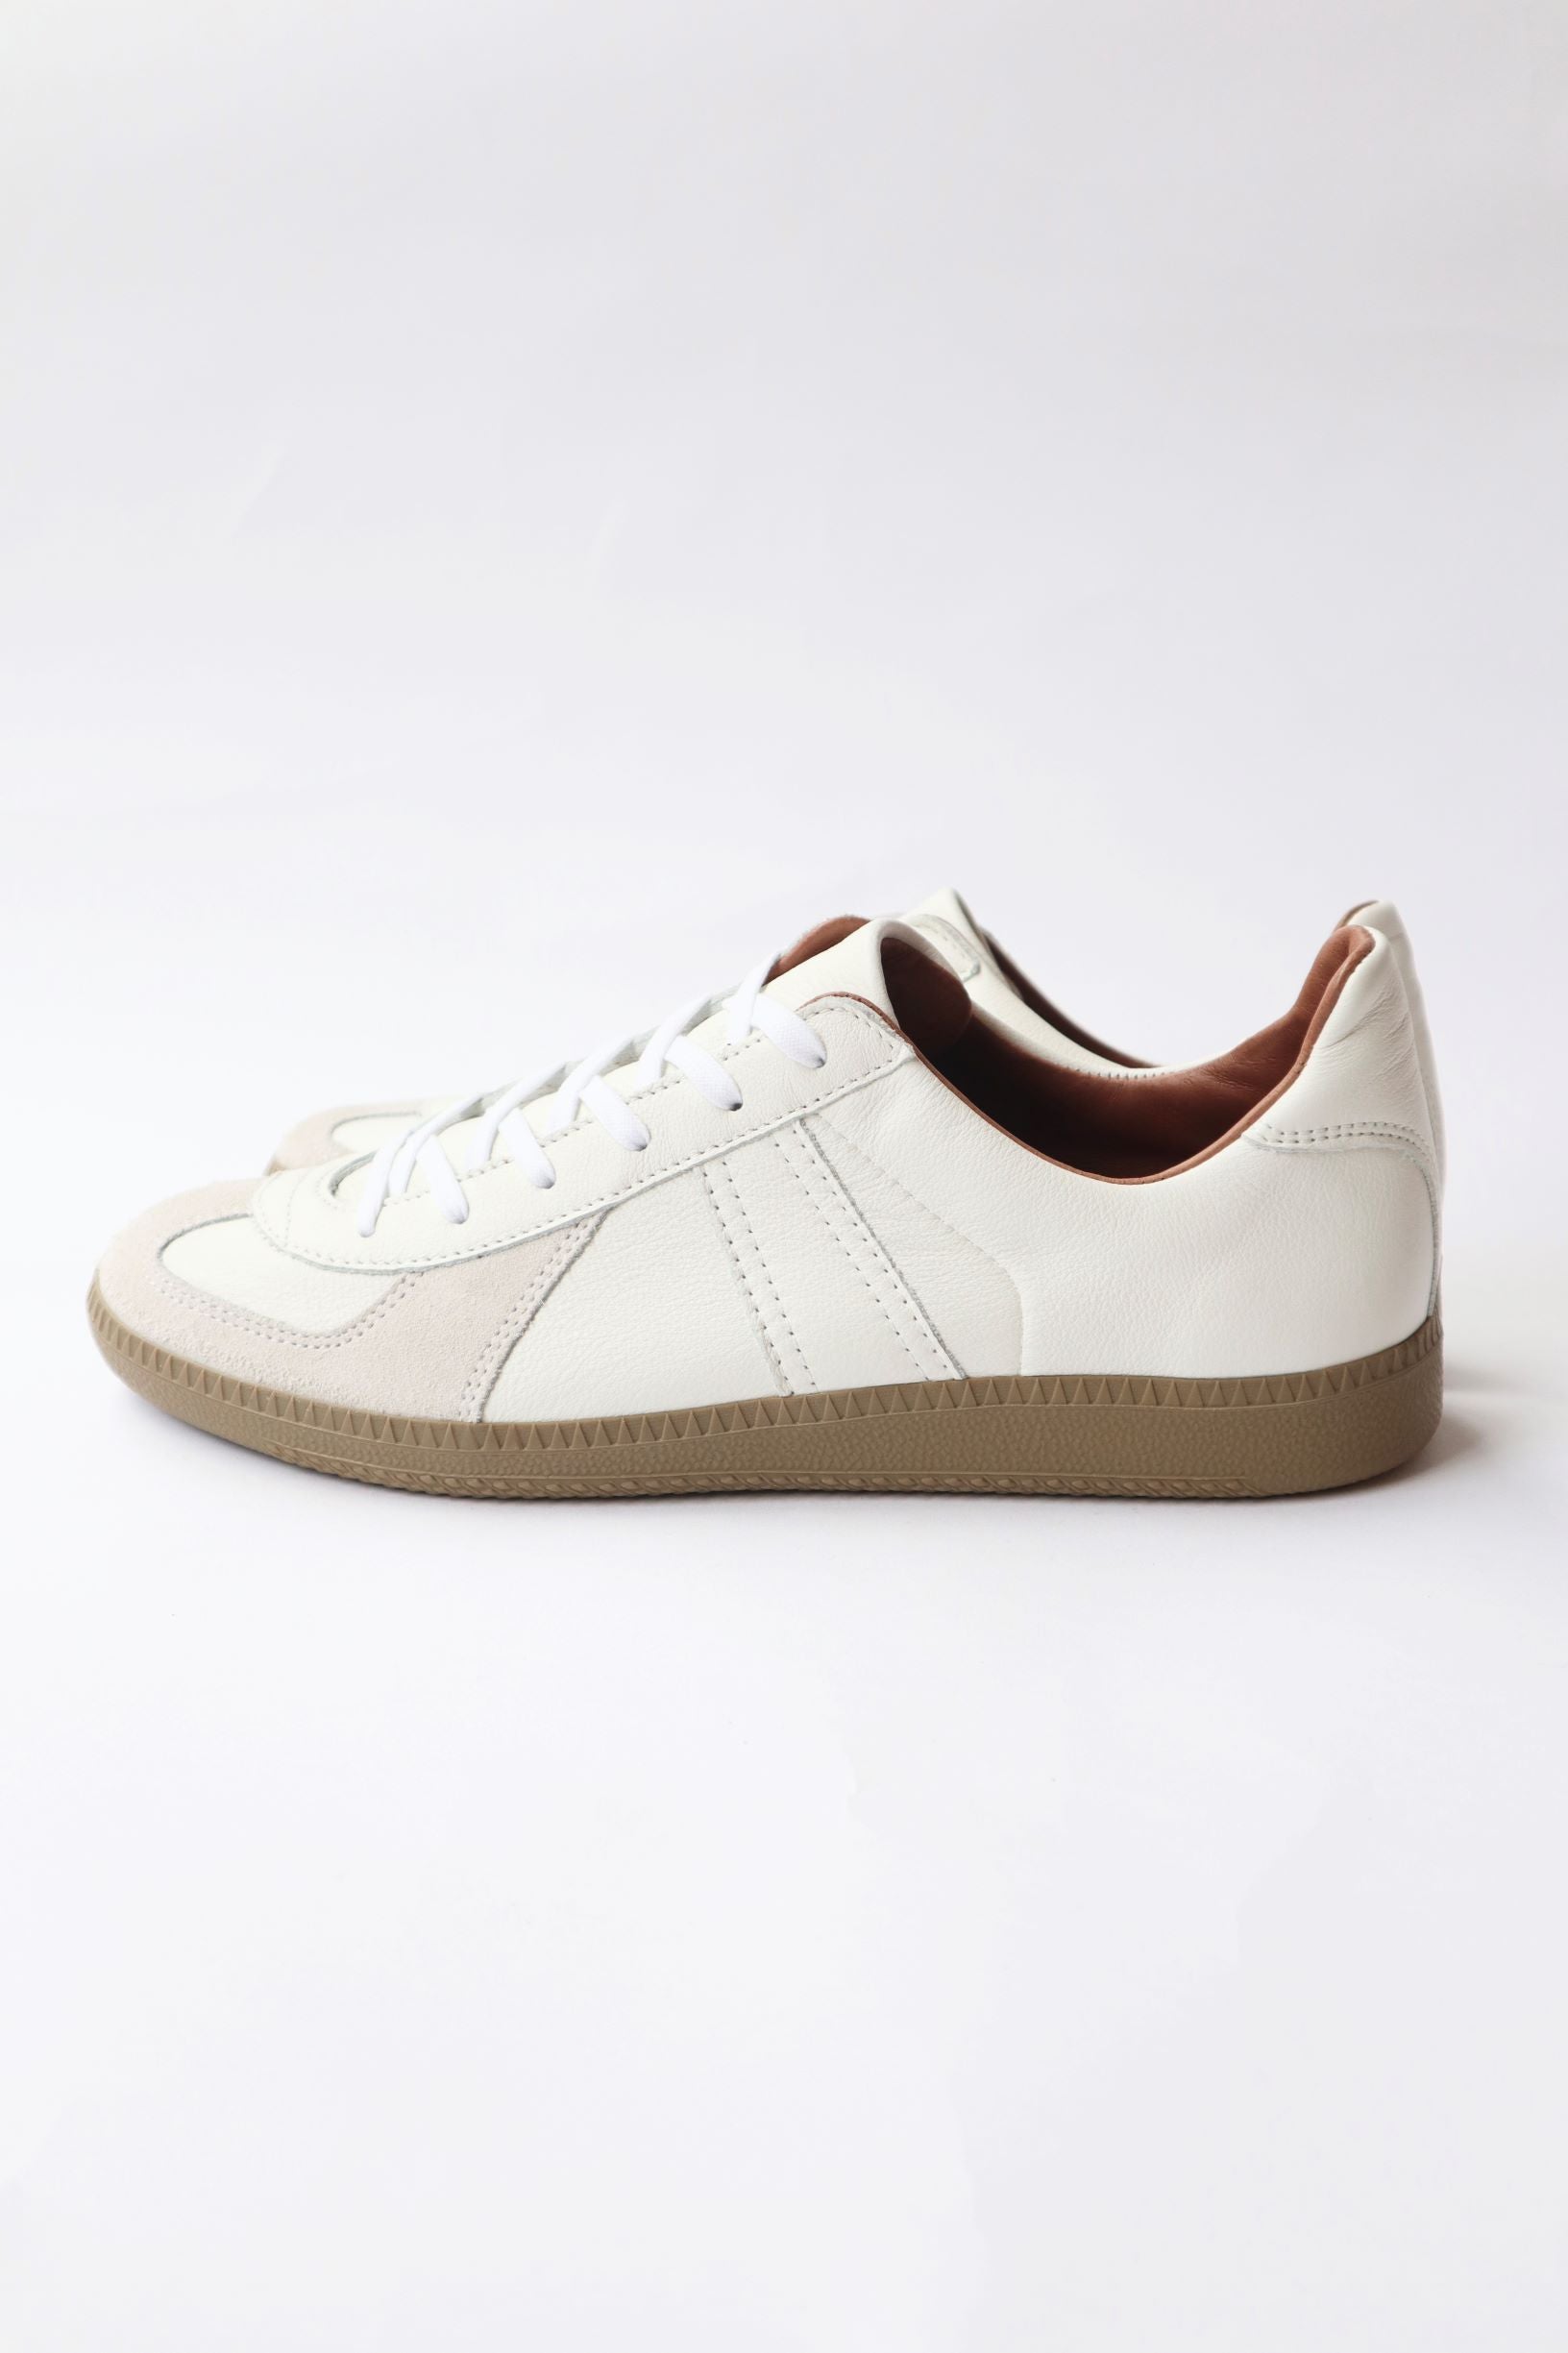 REPRODUCTION OF FOUND | 1700L GERMAN MILITARY TRAINER White